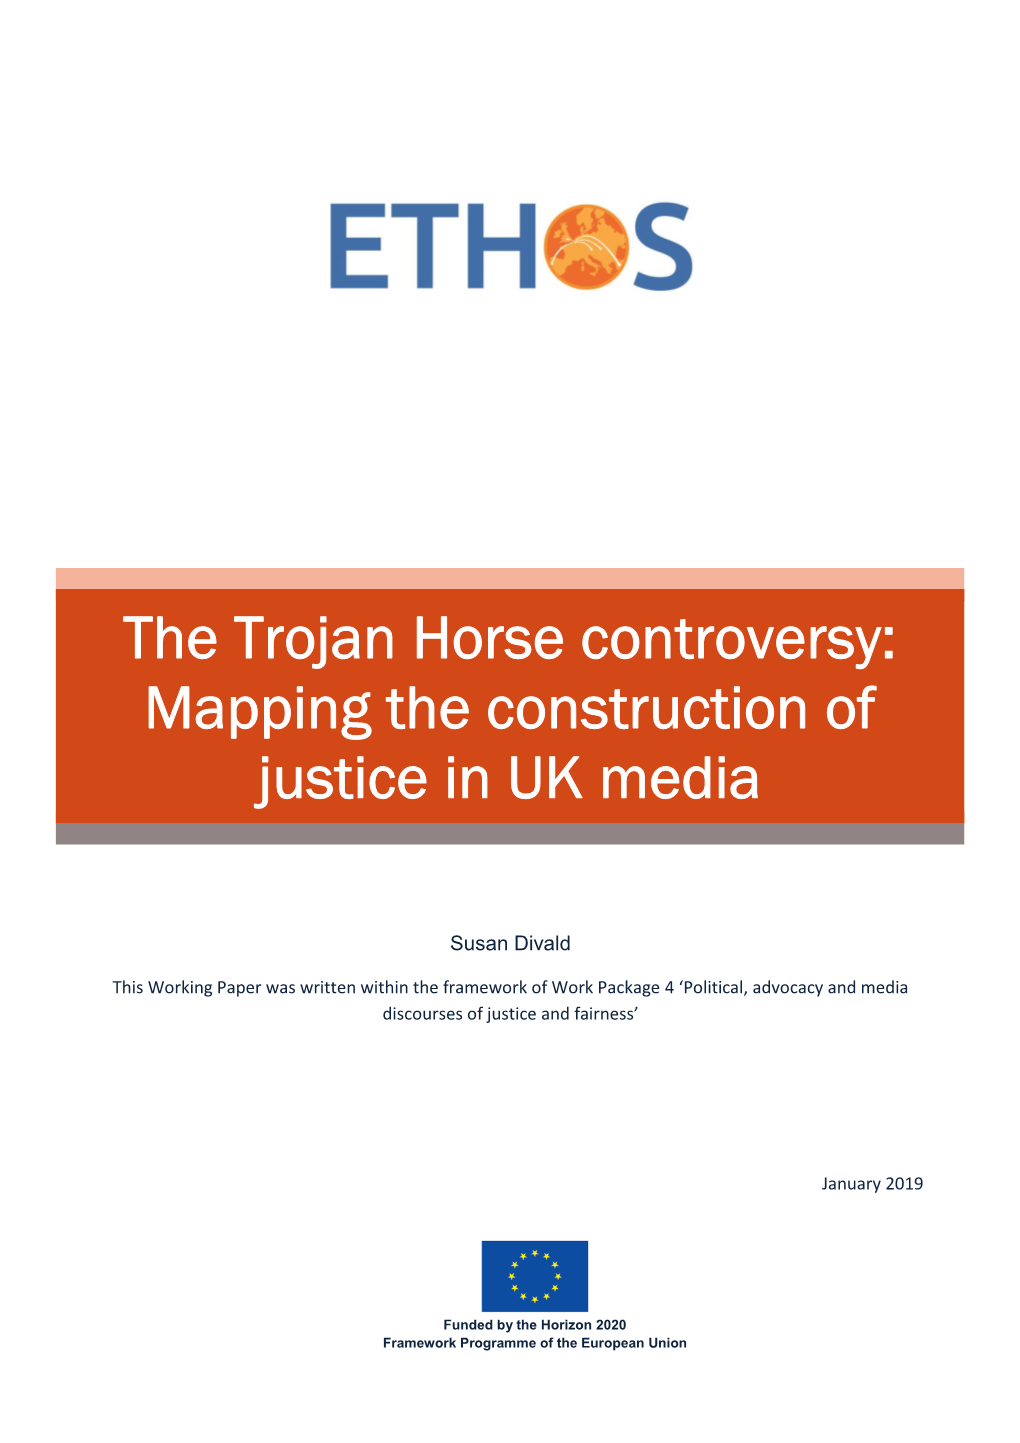 The Trojan Horse Controversy: Mapping the Construction of Justice